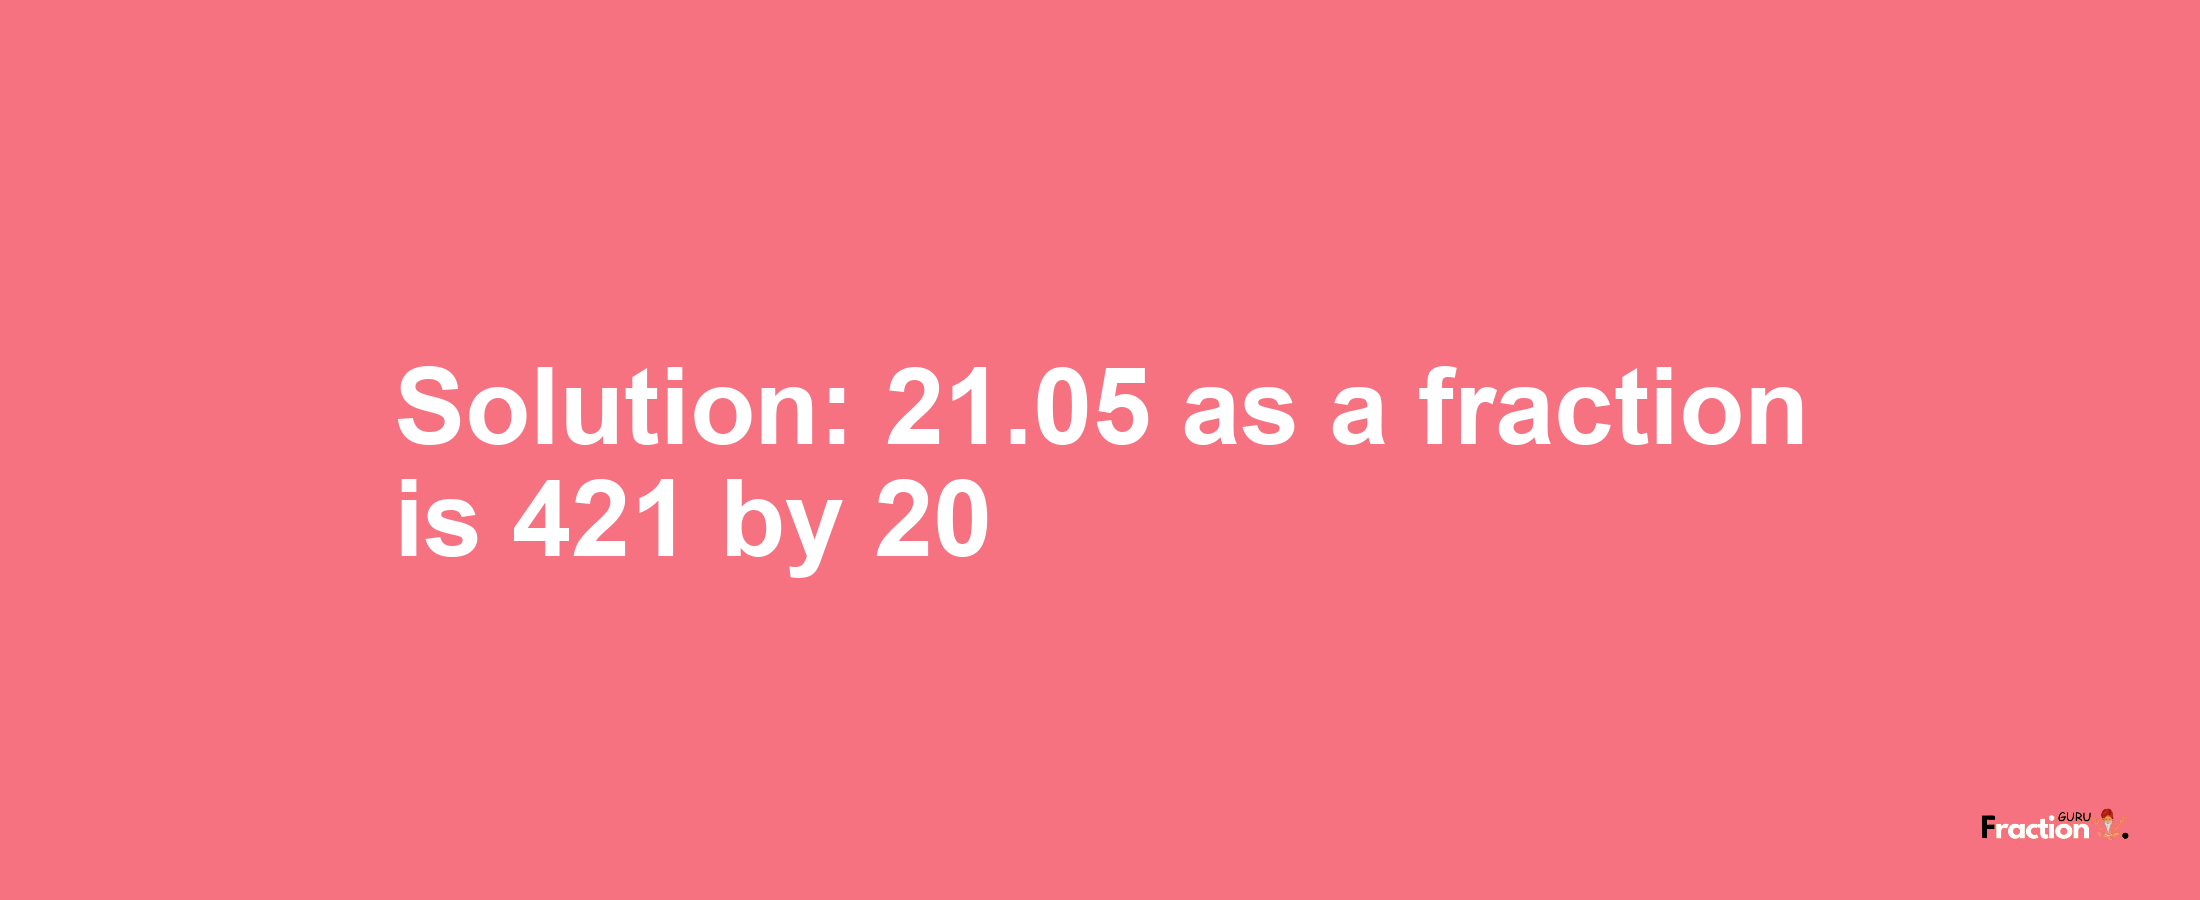 Solution:21.05 as a fraction is 421/20